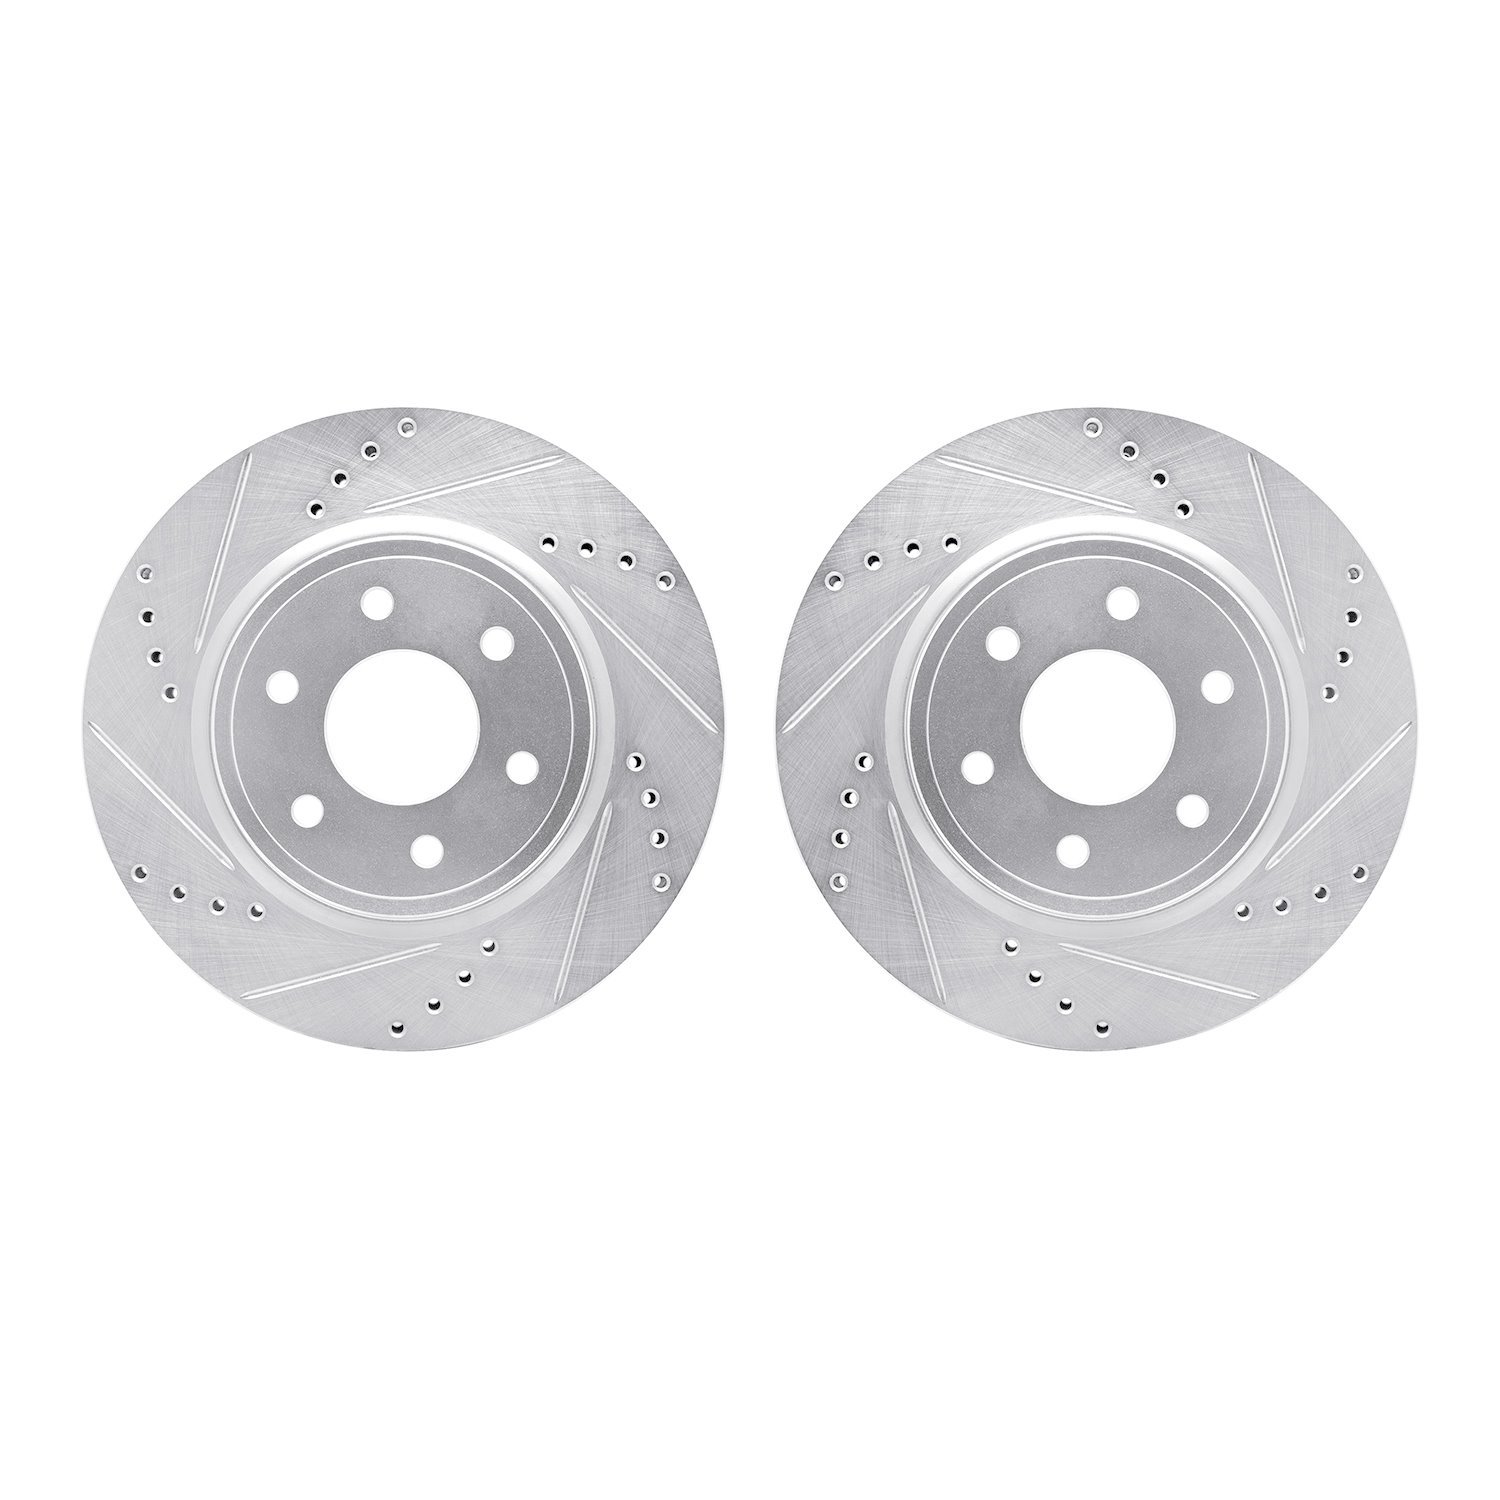 Drilled/Slotted Brake Rotors [Silver], Fits Select Multiple